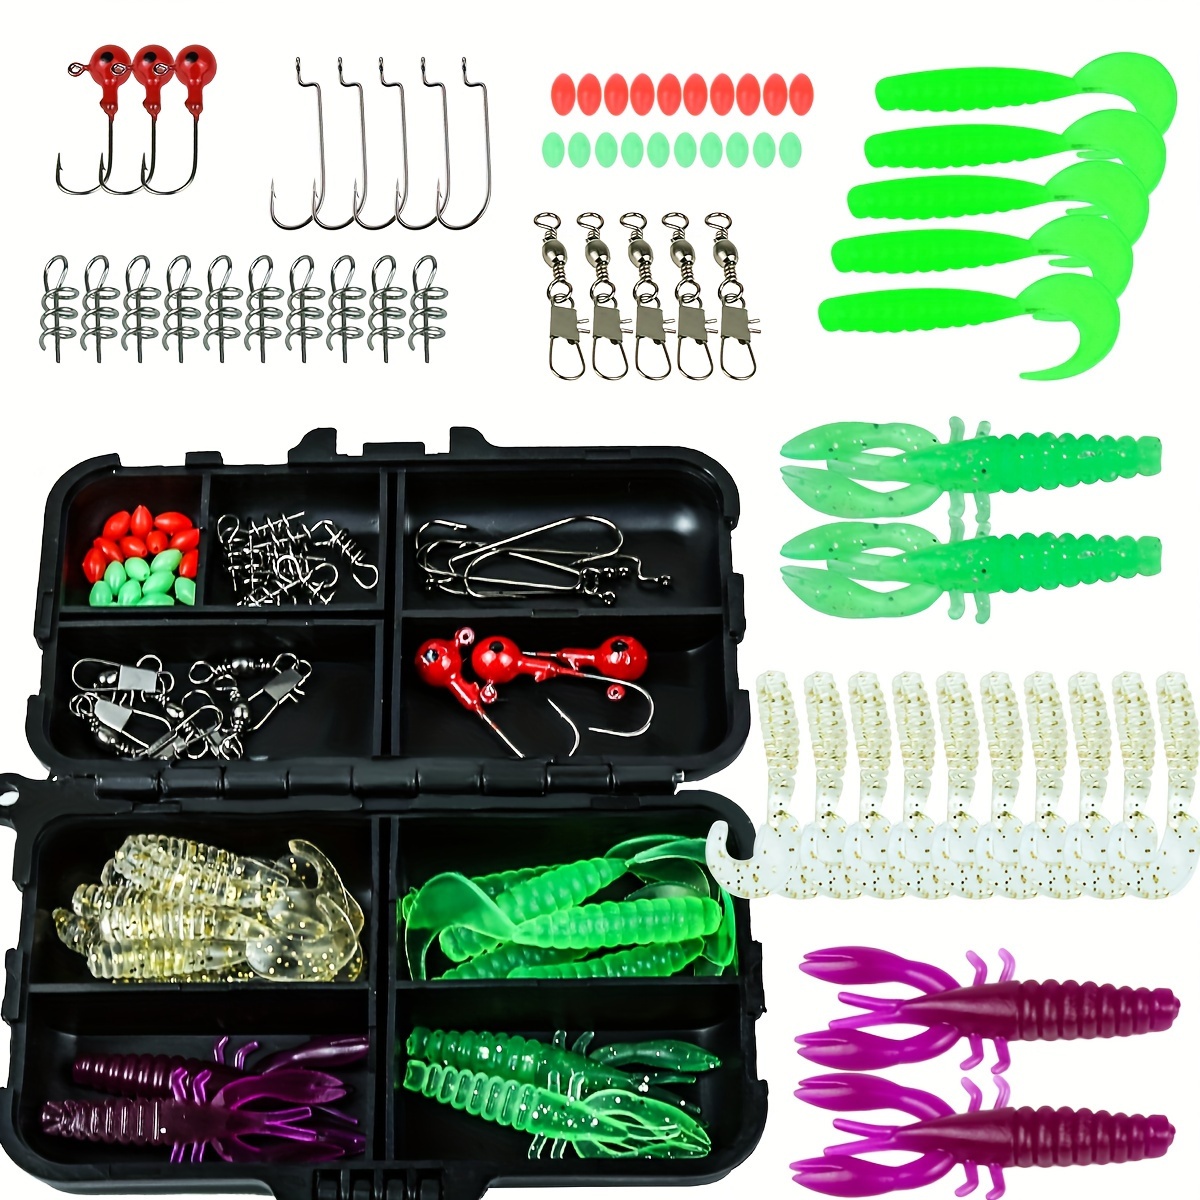 1 Set Fishing Lures Kit Including Soft Worms Fishing Hooks For Freshwater,  Fishing Accessories For Bass Trout Salmon